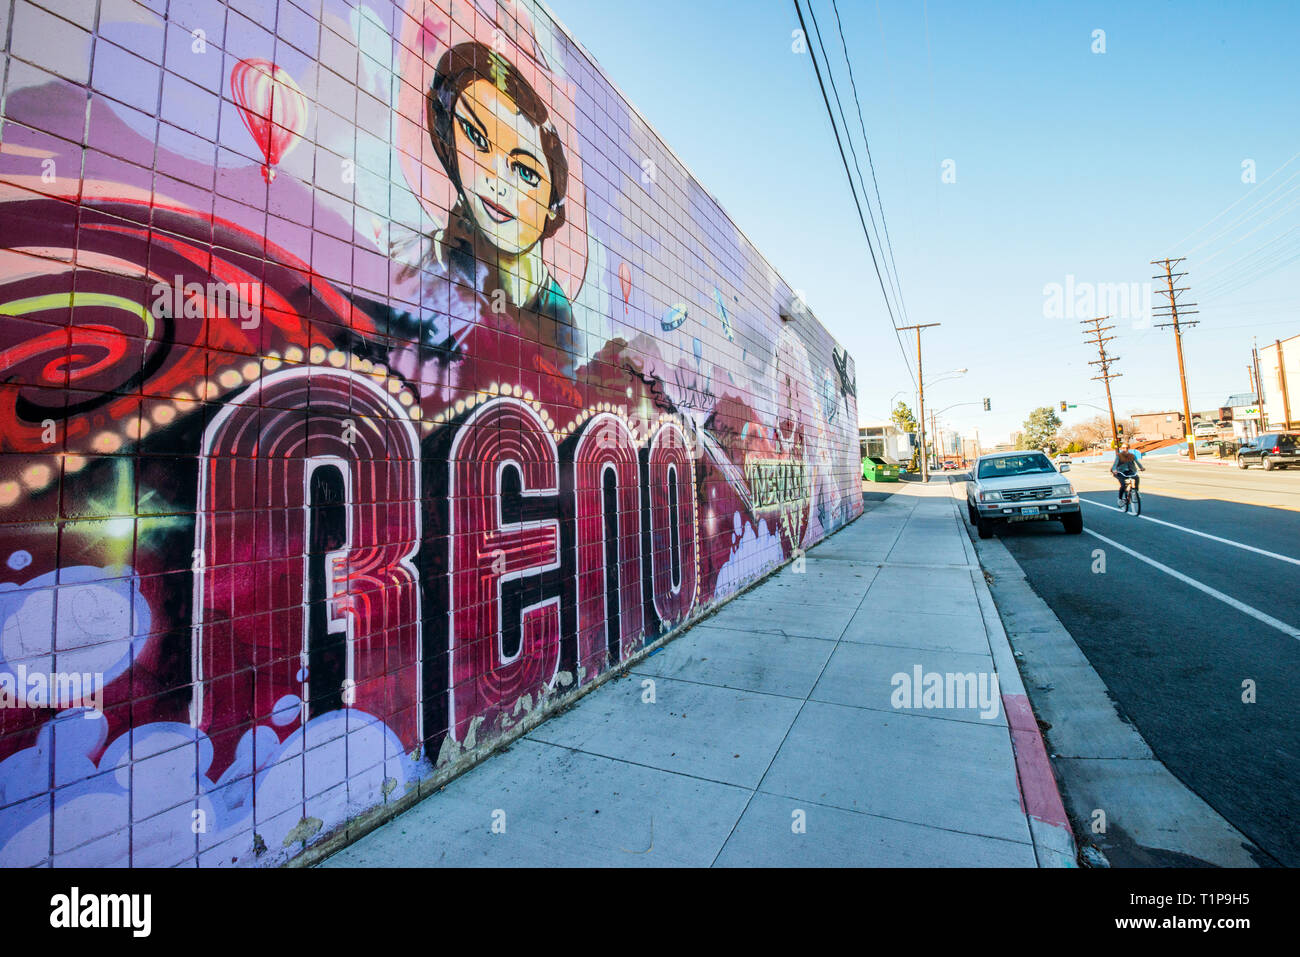 A mural is painted on the side of a building in the midtown district of Reno, Nevada. Stock Photo